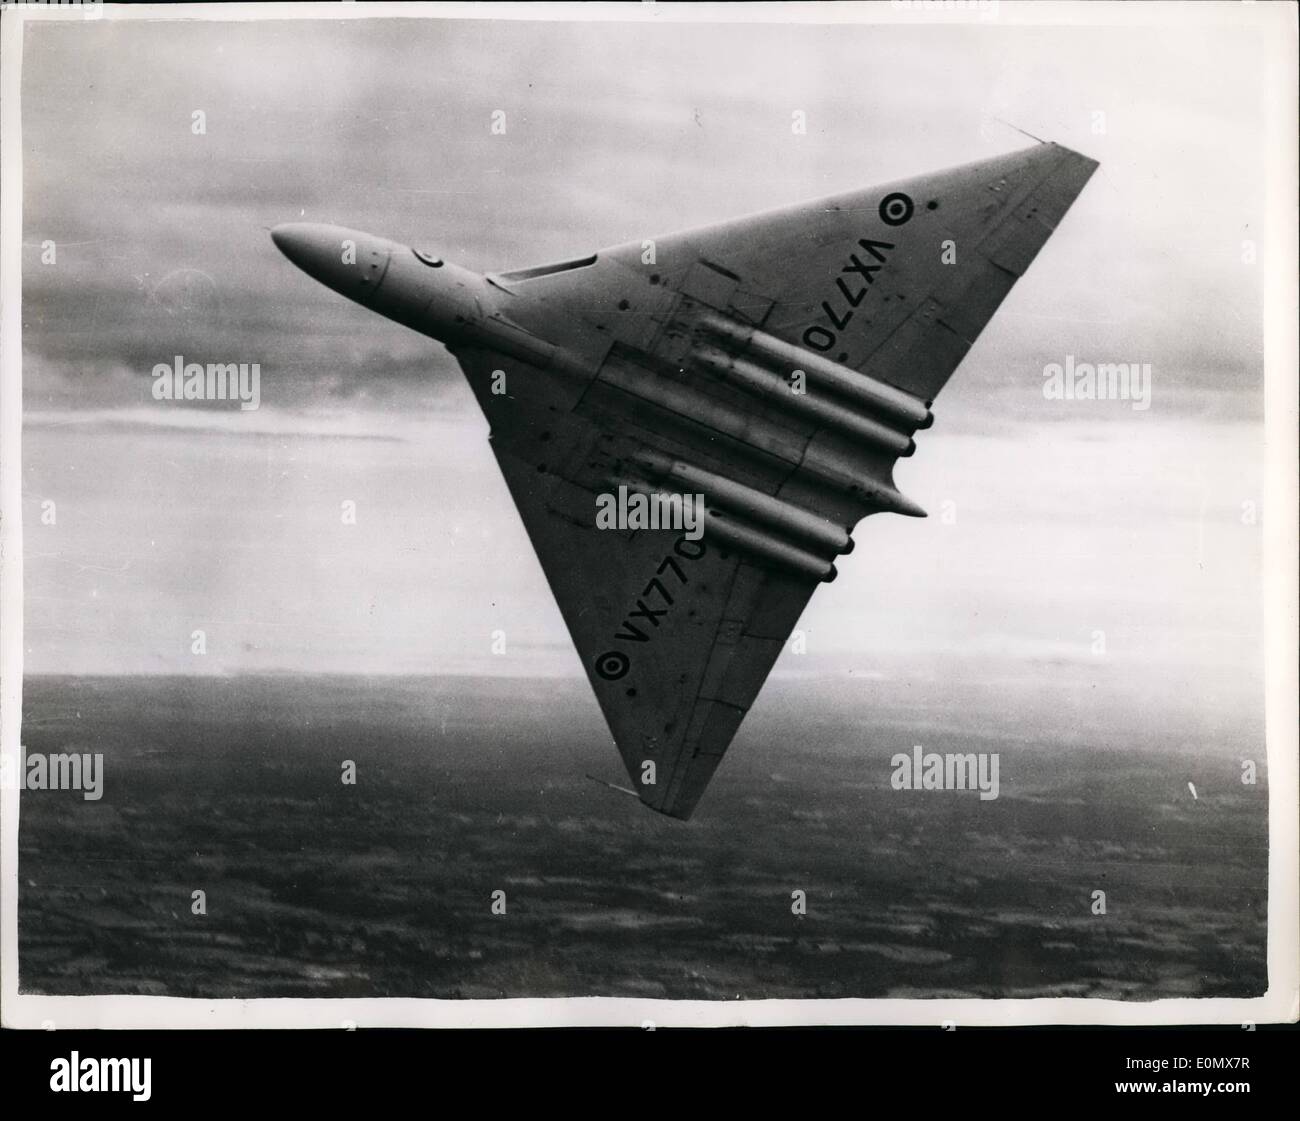 Oct. 10, 1956 - Avro Vulcan Aircraft Crashes at London Airport at end of 26,000 mile tour. The R.A.F Avro Vulcan four jet bomber crashed at London Airport this morning as she was about to land at the end of her 26,000 mile - three week tour of Australia and New Zealand. She is thought to have struck an object on the landing runway. Photo shows view of the Avro Vulcan jet bomber. Stock Photo